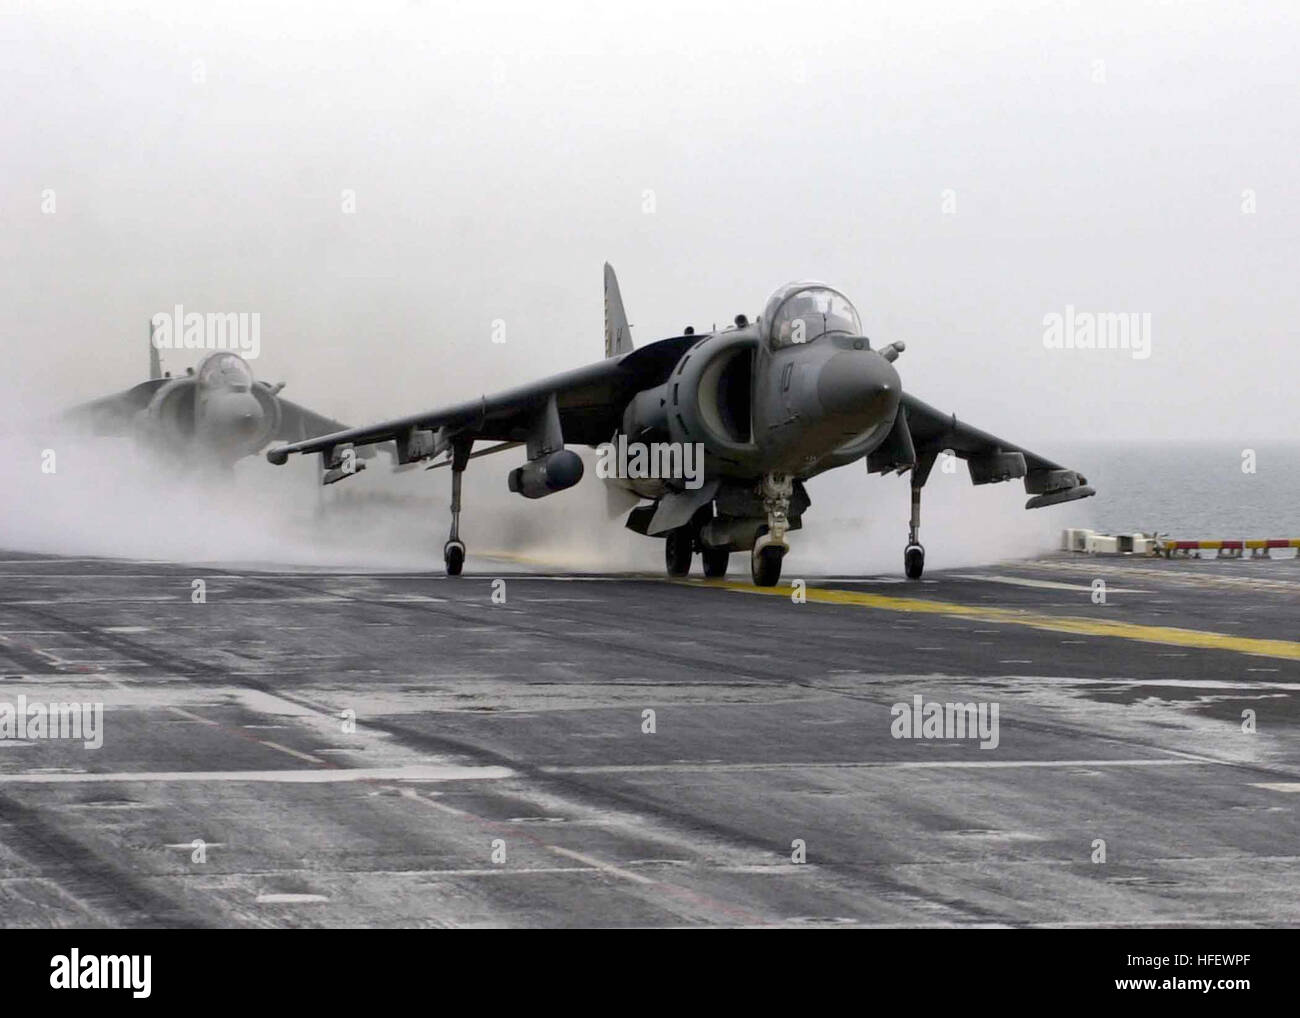 030224-N-6610T-519 Aboard USS Bataan (LHD 5) Feb. 24, 2003 - An AV-8B Harrier jump jet assigned to the ÒTigersÓ of Marine Attack Squadron Five Four Two (VMA-542) prepares to takes off from the flight deck of the amphibious assault ship USS Bataan (LHD 5). The Harrier is carrying the newer AN/AAQ-28 Litening targeting pod on its starboard wing pylon. The pod is an advanced airborne targeting and navigation pod that is designed to improve both day and night attack capabilities and improve low level night flights. U.S. Navy photo by PhotographerÕs Mate 3rd Class John Taucher. (RELEASED) US Navy 0 Stock Photo